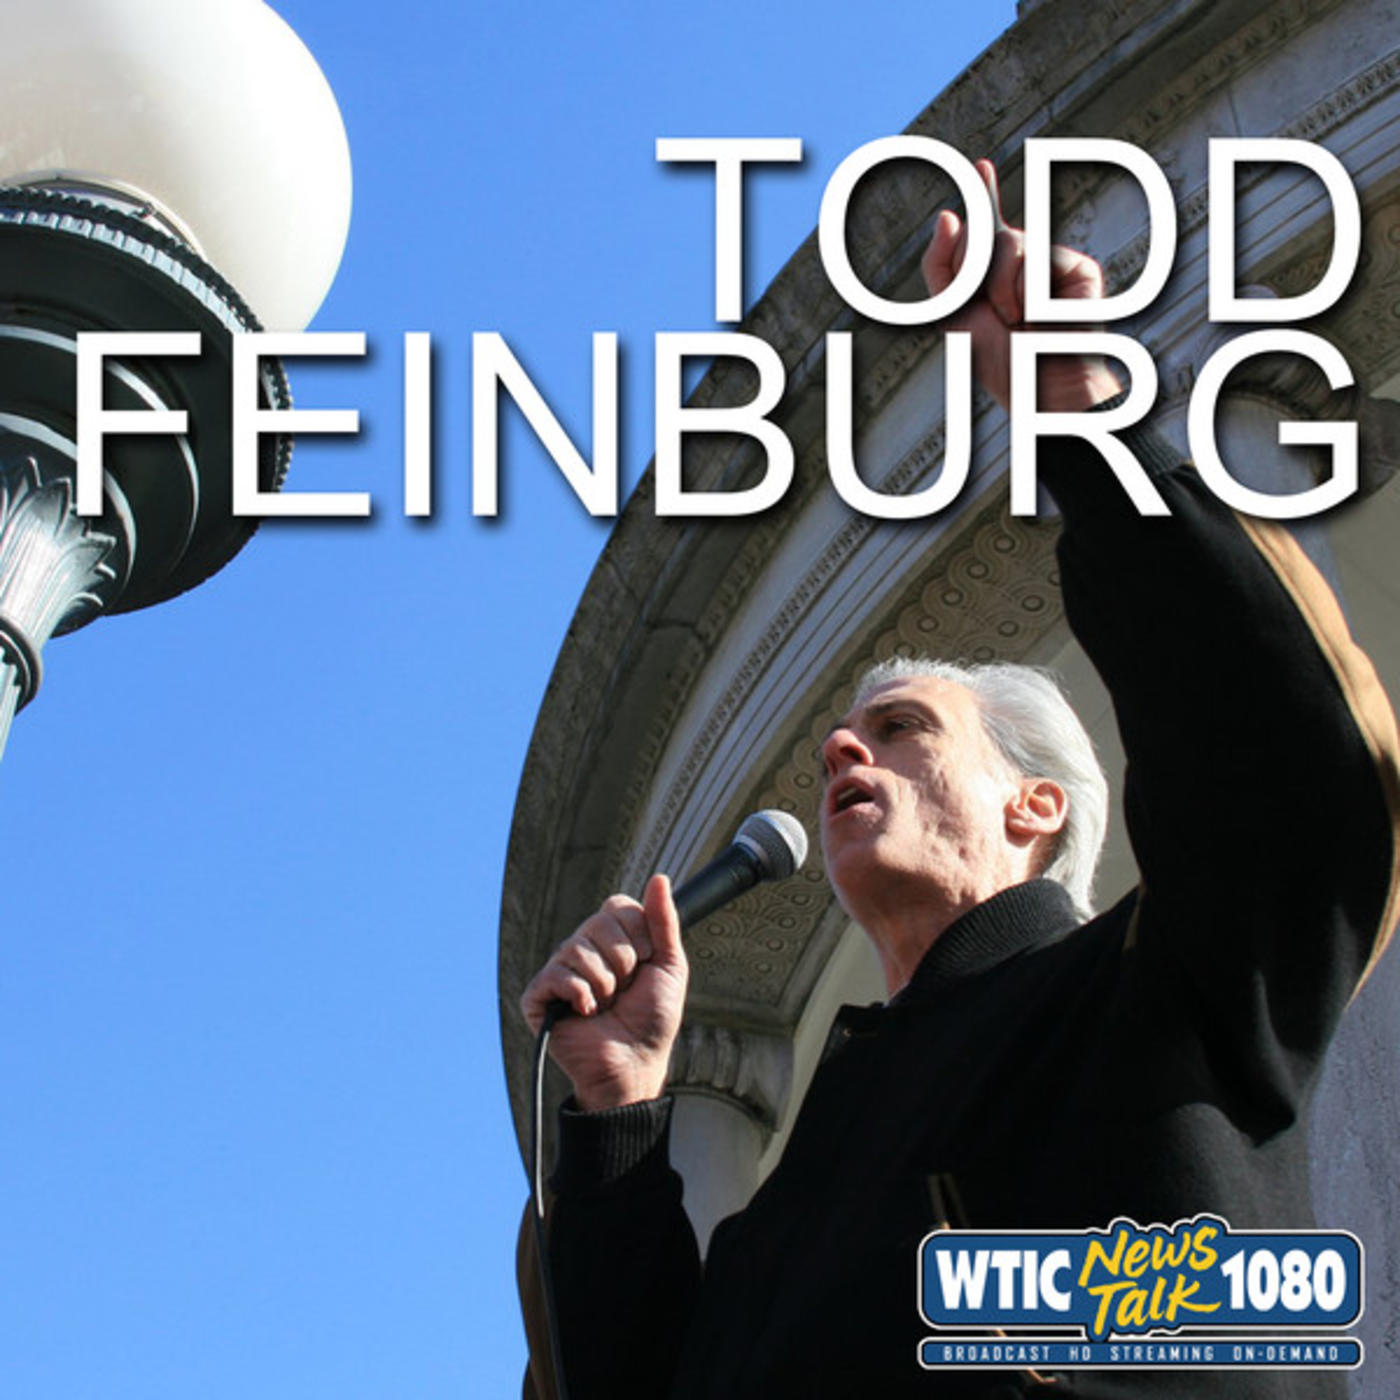 Todd Feinburg: Standing Up to Lawlessness with Tom Scott (06/23/20)